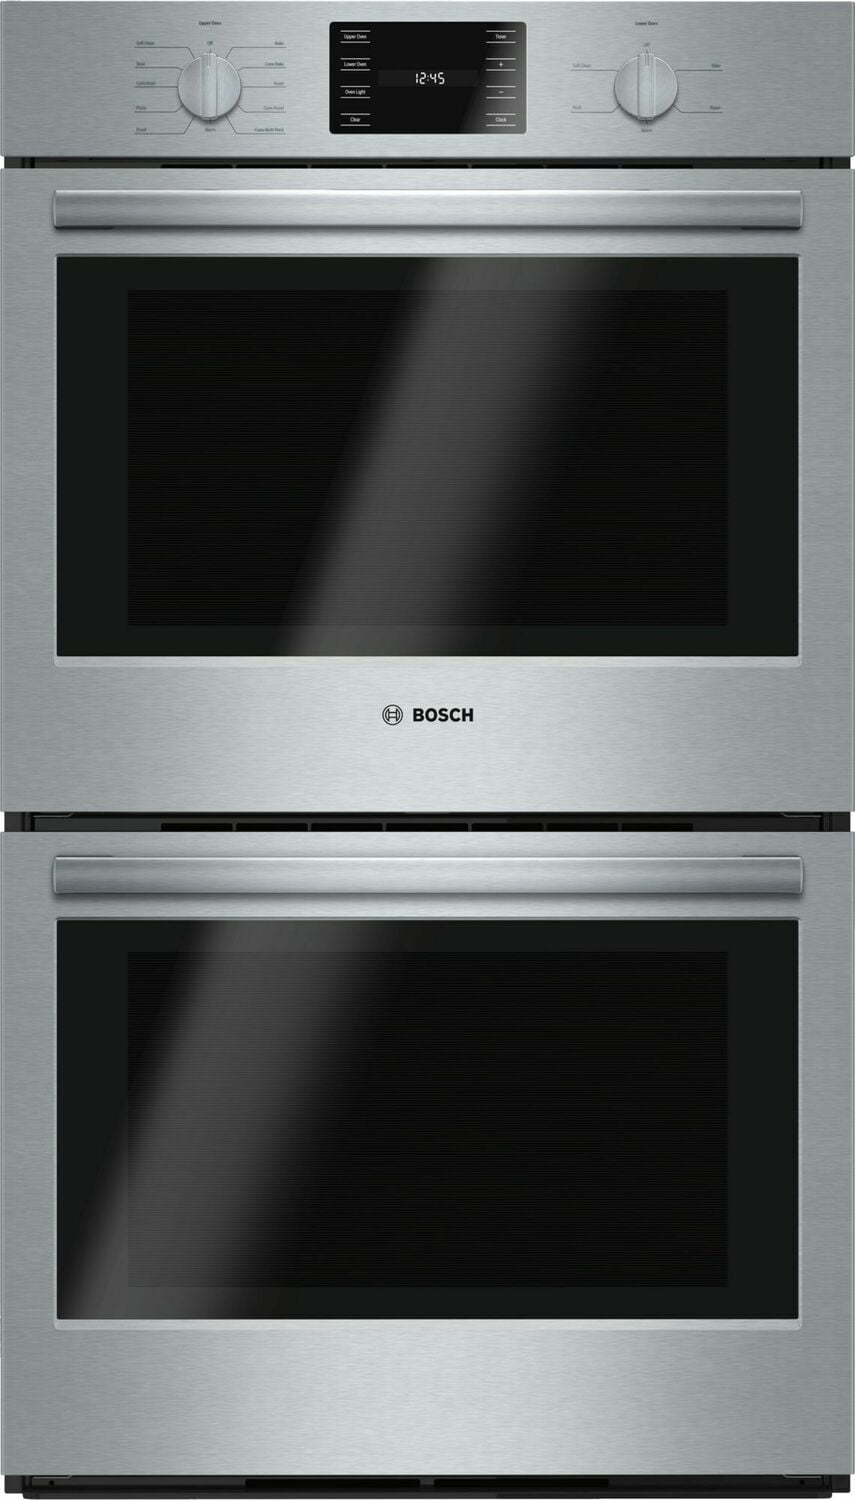 Bosch HBL5651UC 500 Series, 30", Double Wall Oven, Ss, Eu Conv./Thermal, Knob Control